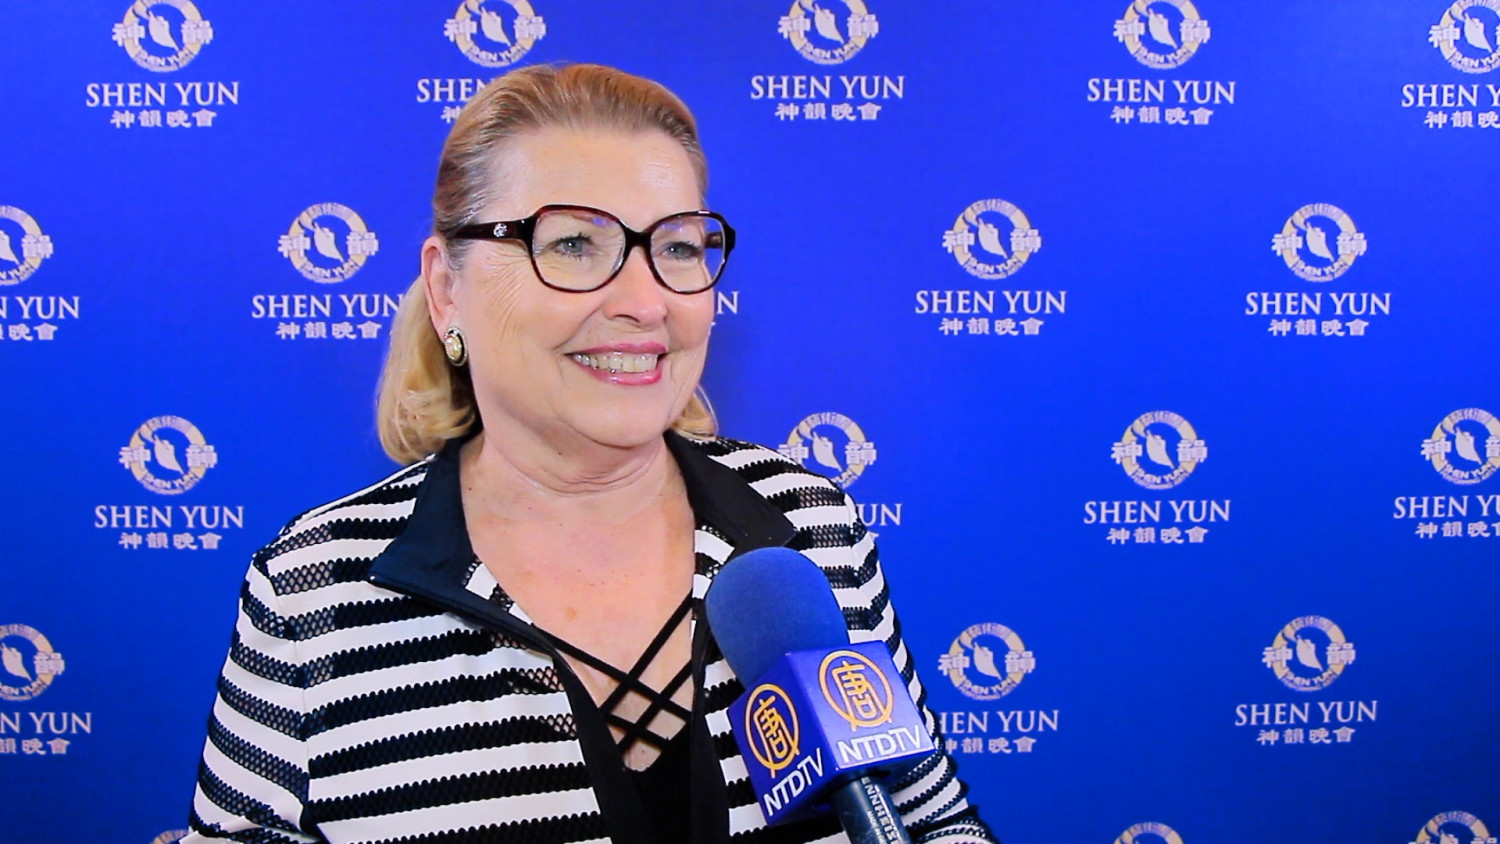 Executive Producer Sees Spark of Divine in Shen Yun